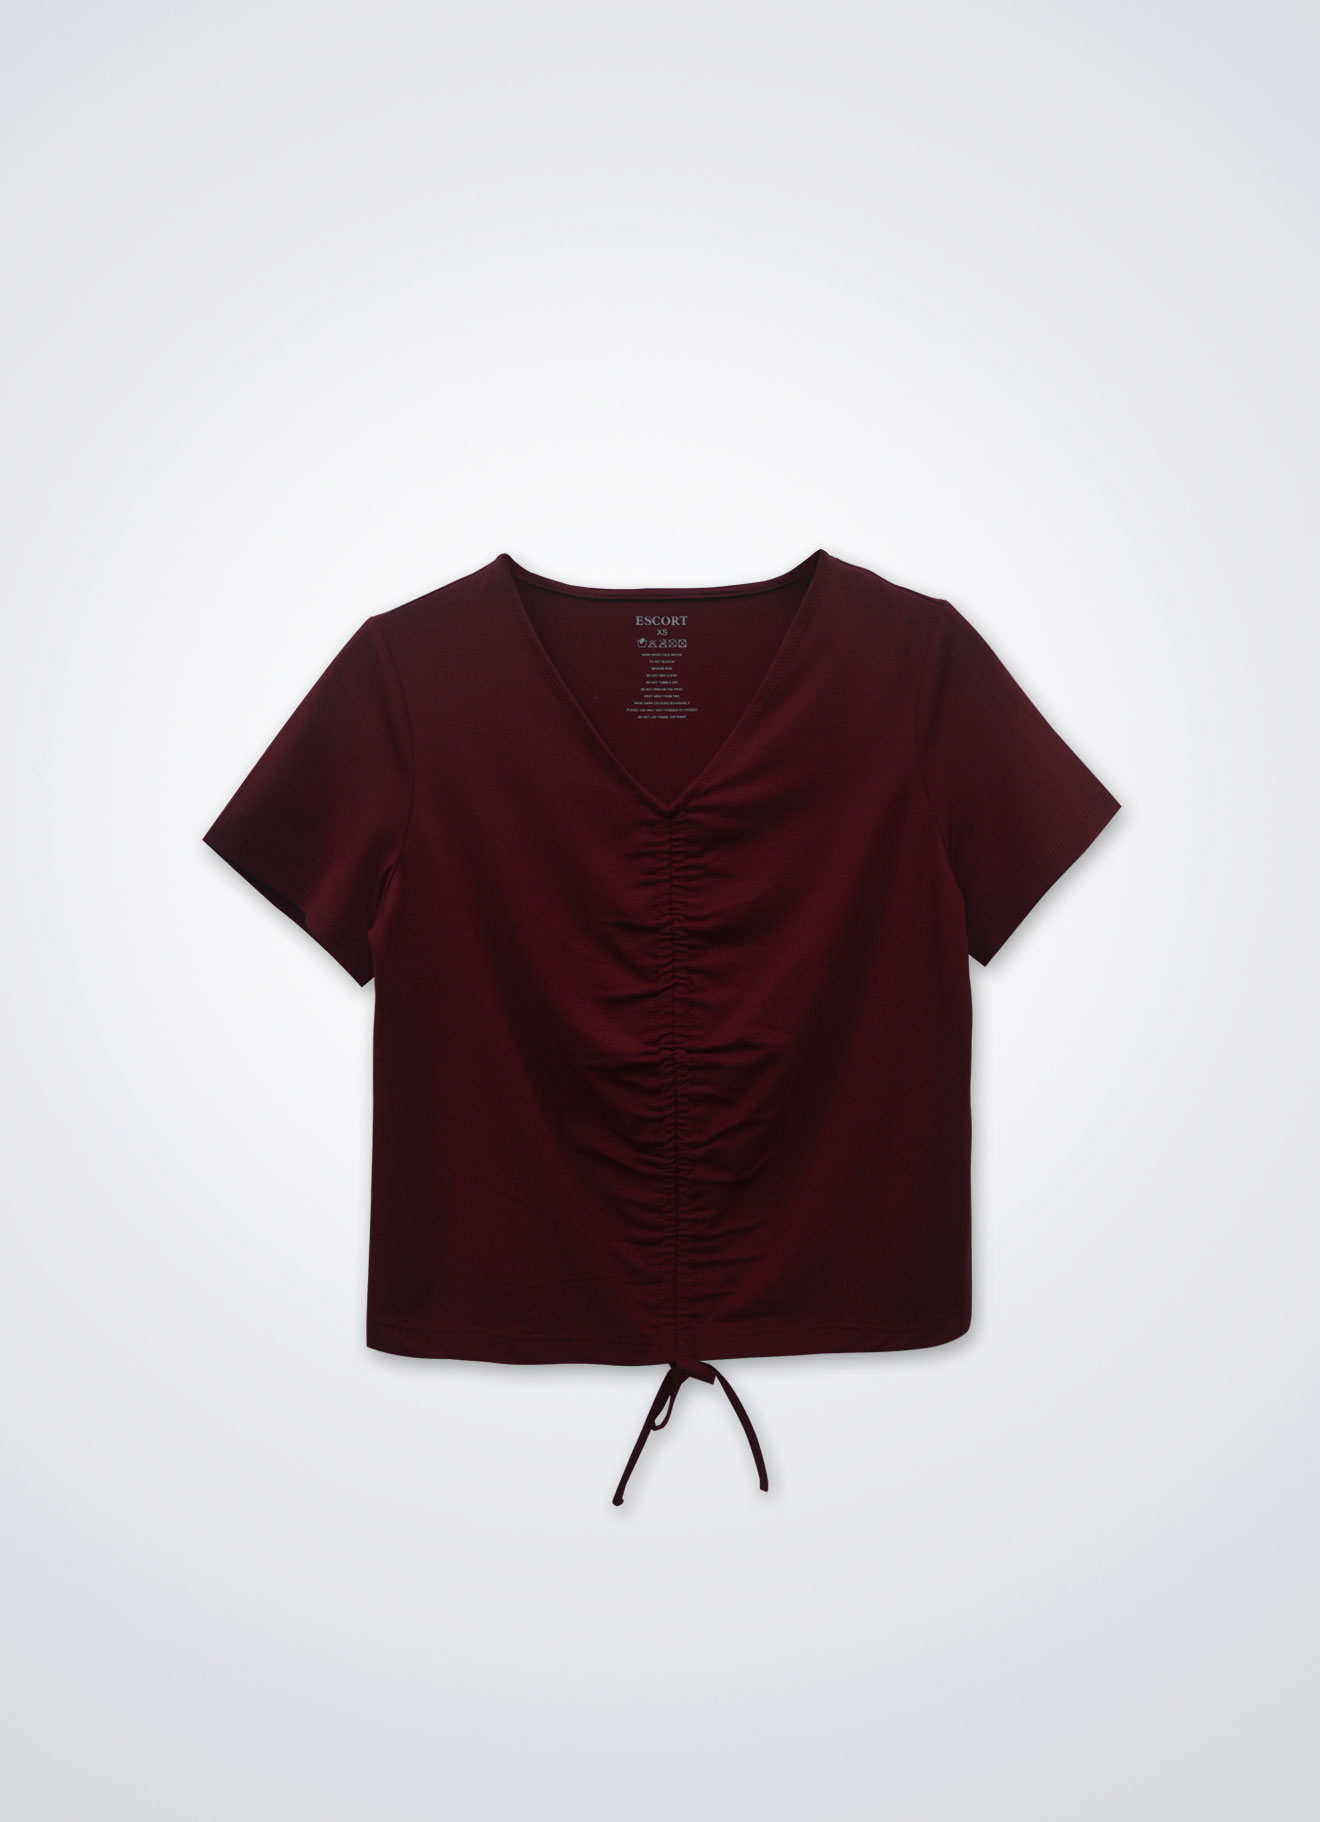 Rio-Red by Sleeve Top